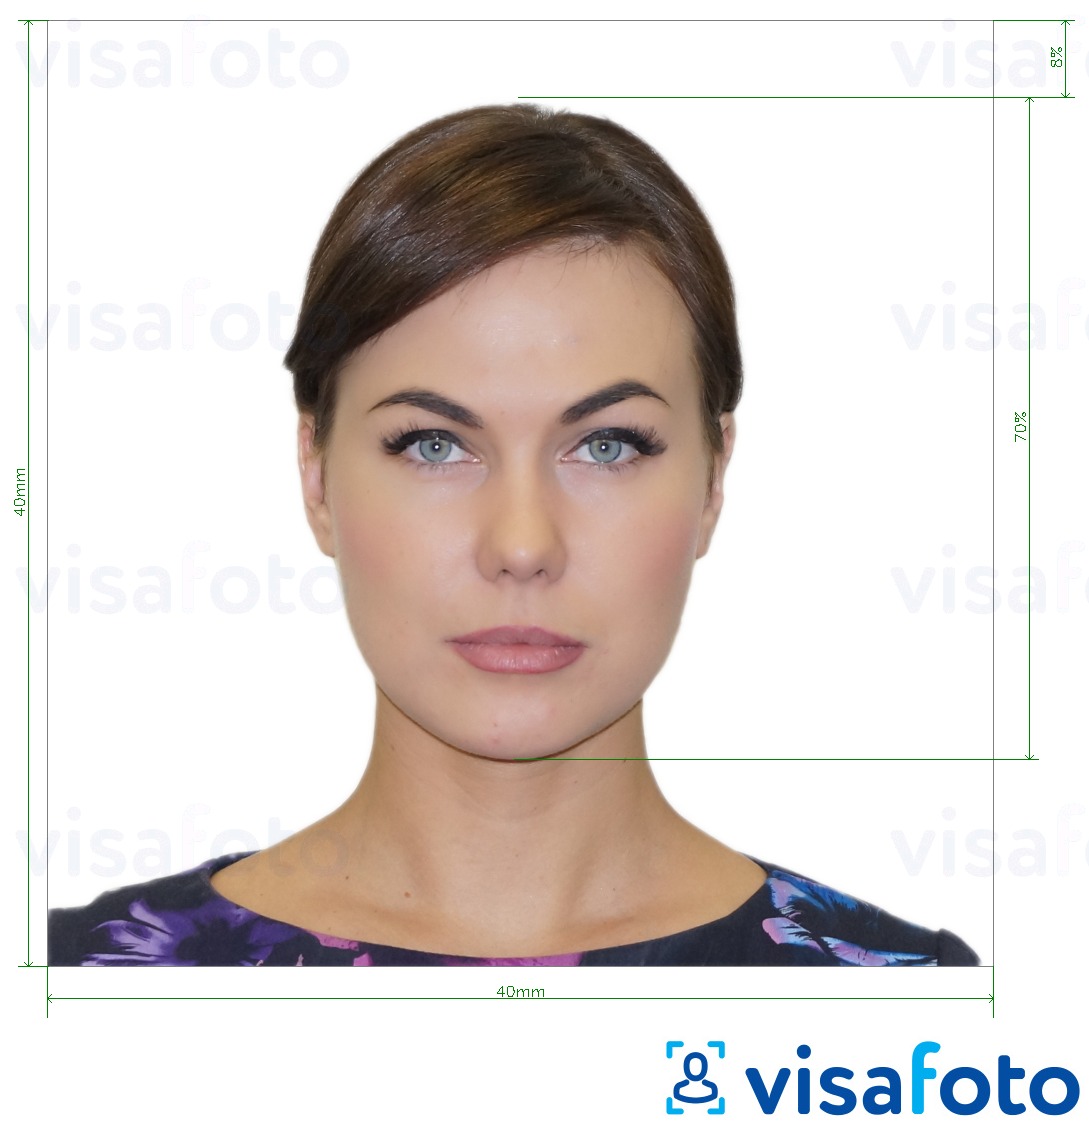 Example of photo for Argentina passport 4x4 cm (40x40 mm) with exact size specification